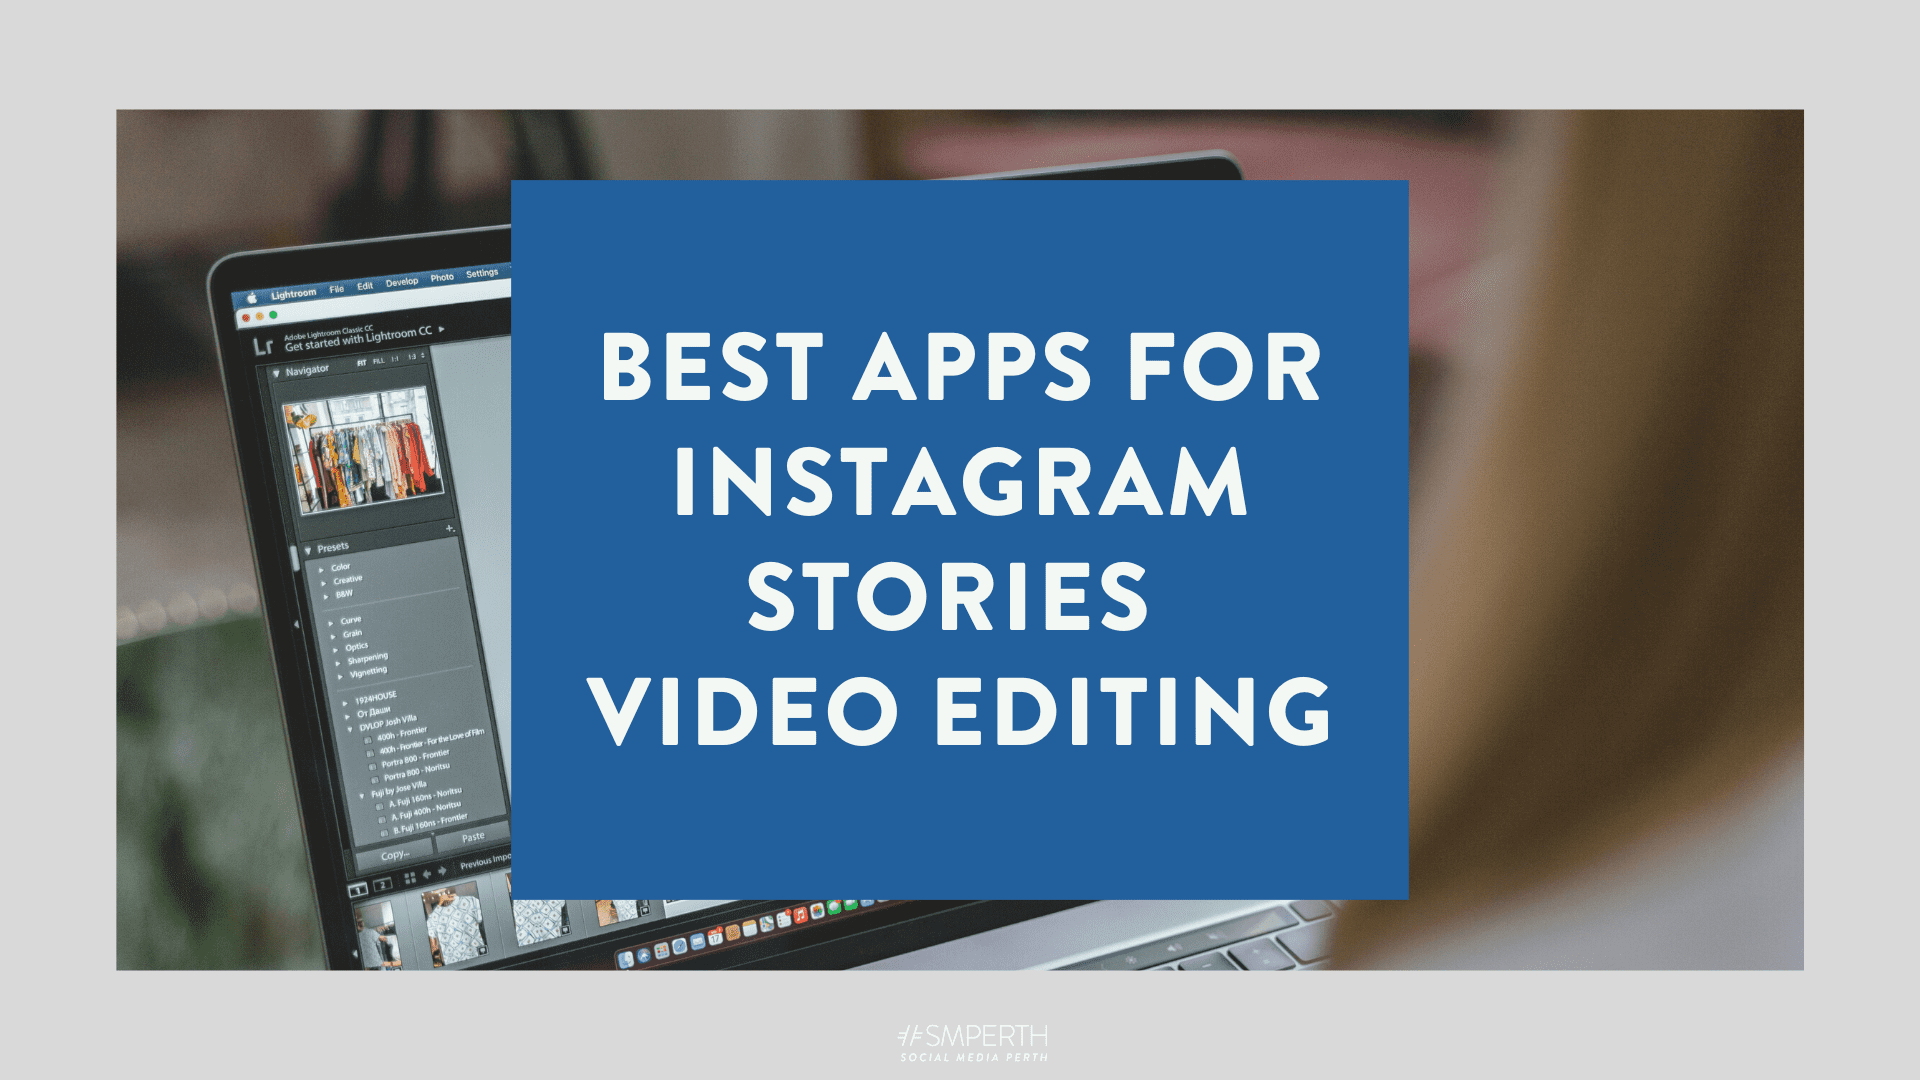 7 Best Apps for Instagram Stories Video Editing // Social Media Perth